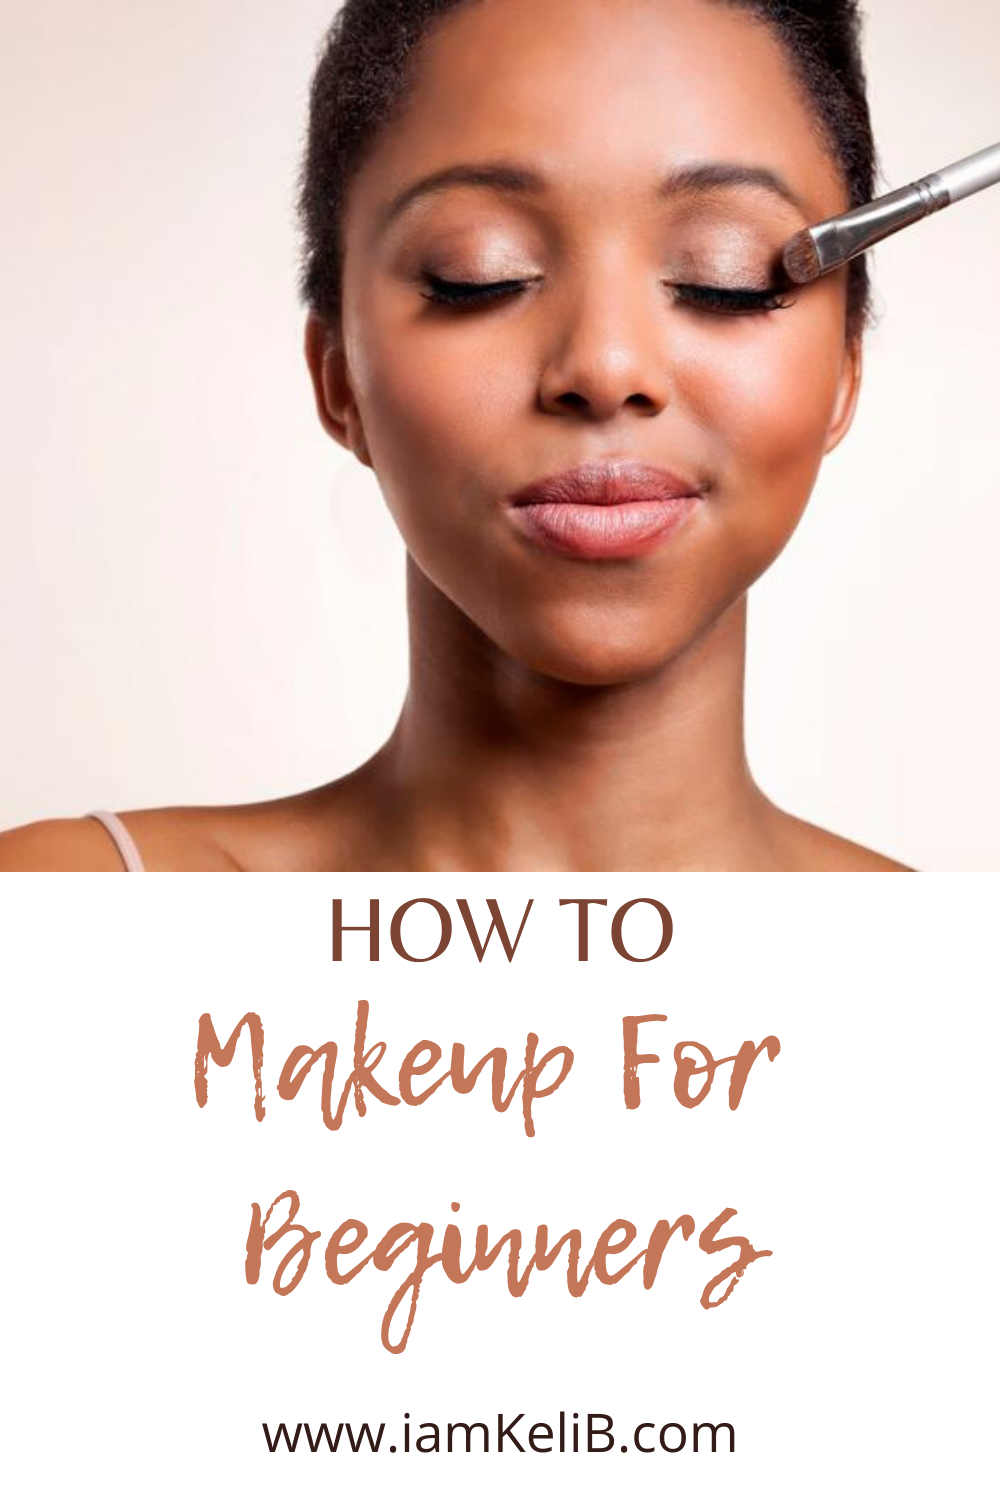 Makeup For Beginners